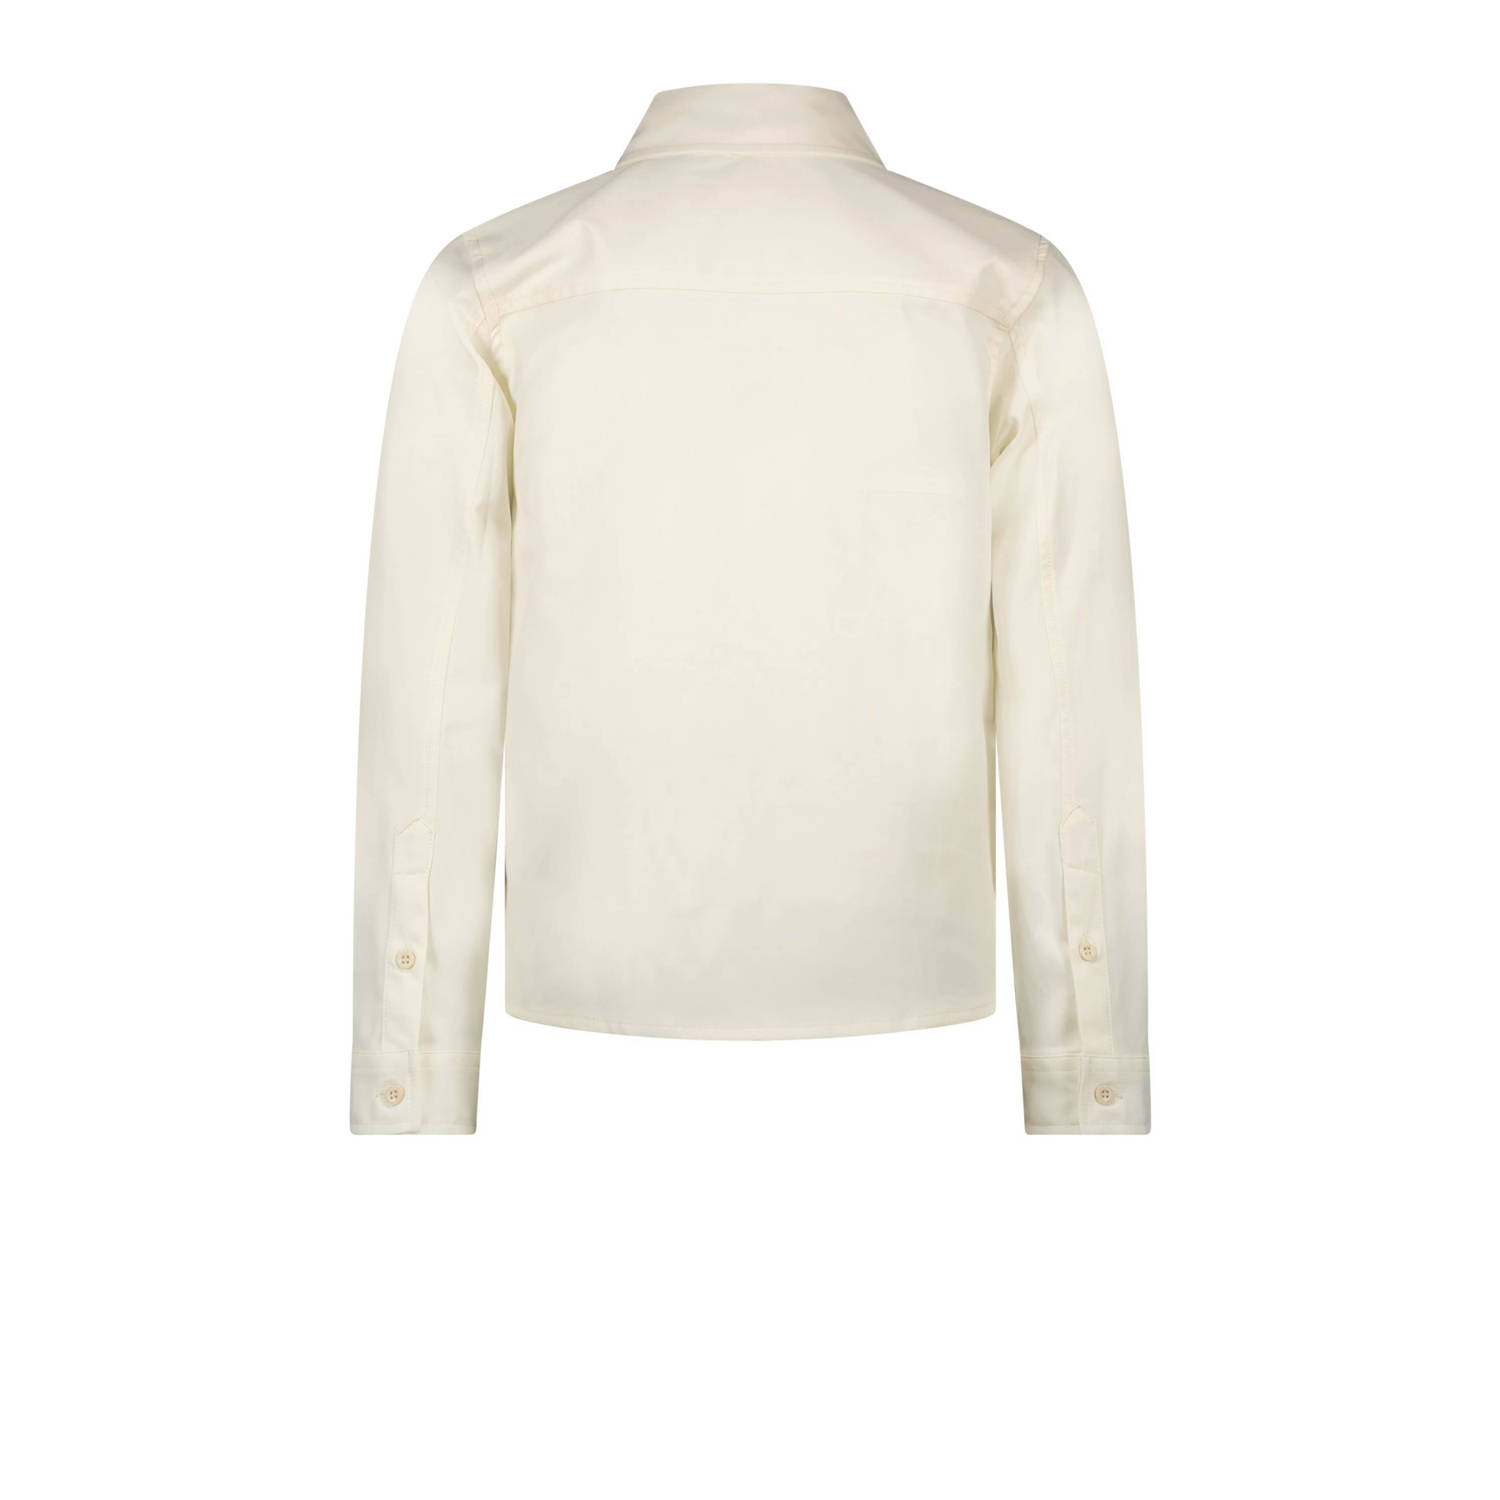 Le Chic Garcon overhemd EVI offwhite